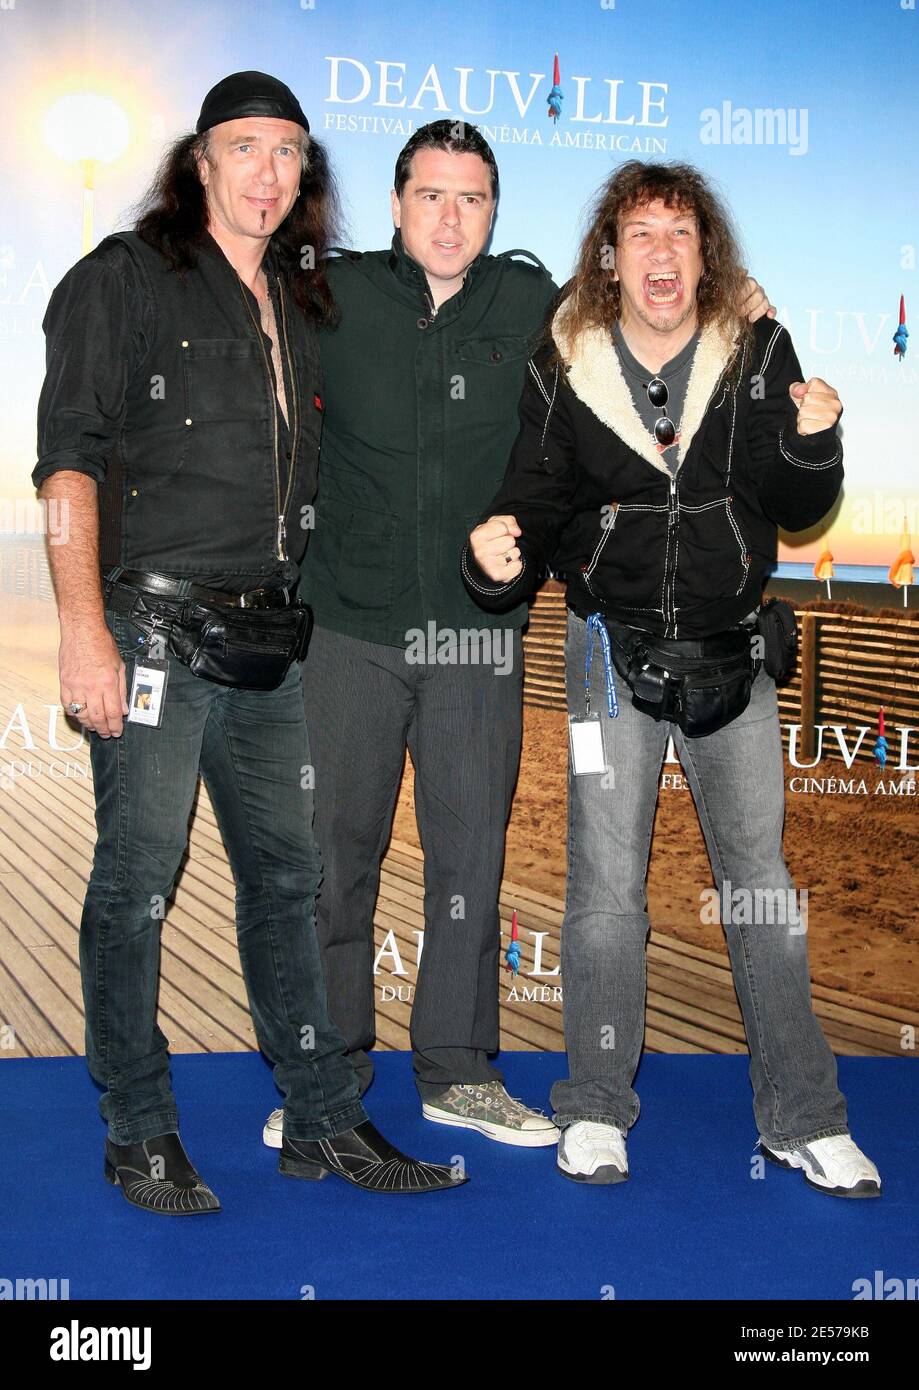 US singer Steve 'Lips' Kudlow, British born director Sacha Gervasi and US singer Robb Reiner pose during the photocall for 'Anvil! The Story of Anvil' as a part of the 34th American Film Festival in Deauville, Normandy, France, on September 06, 2008. Photo by Denis Guignebourg/ABACAPRESS.COM Stock Photo